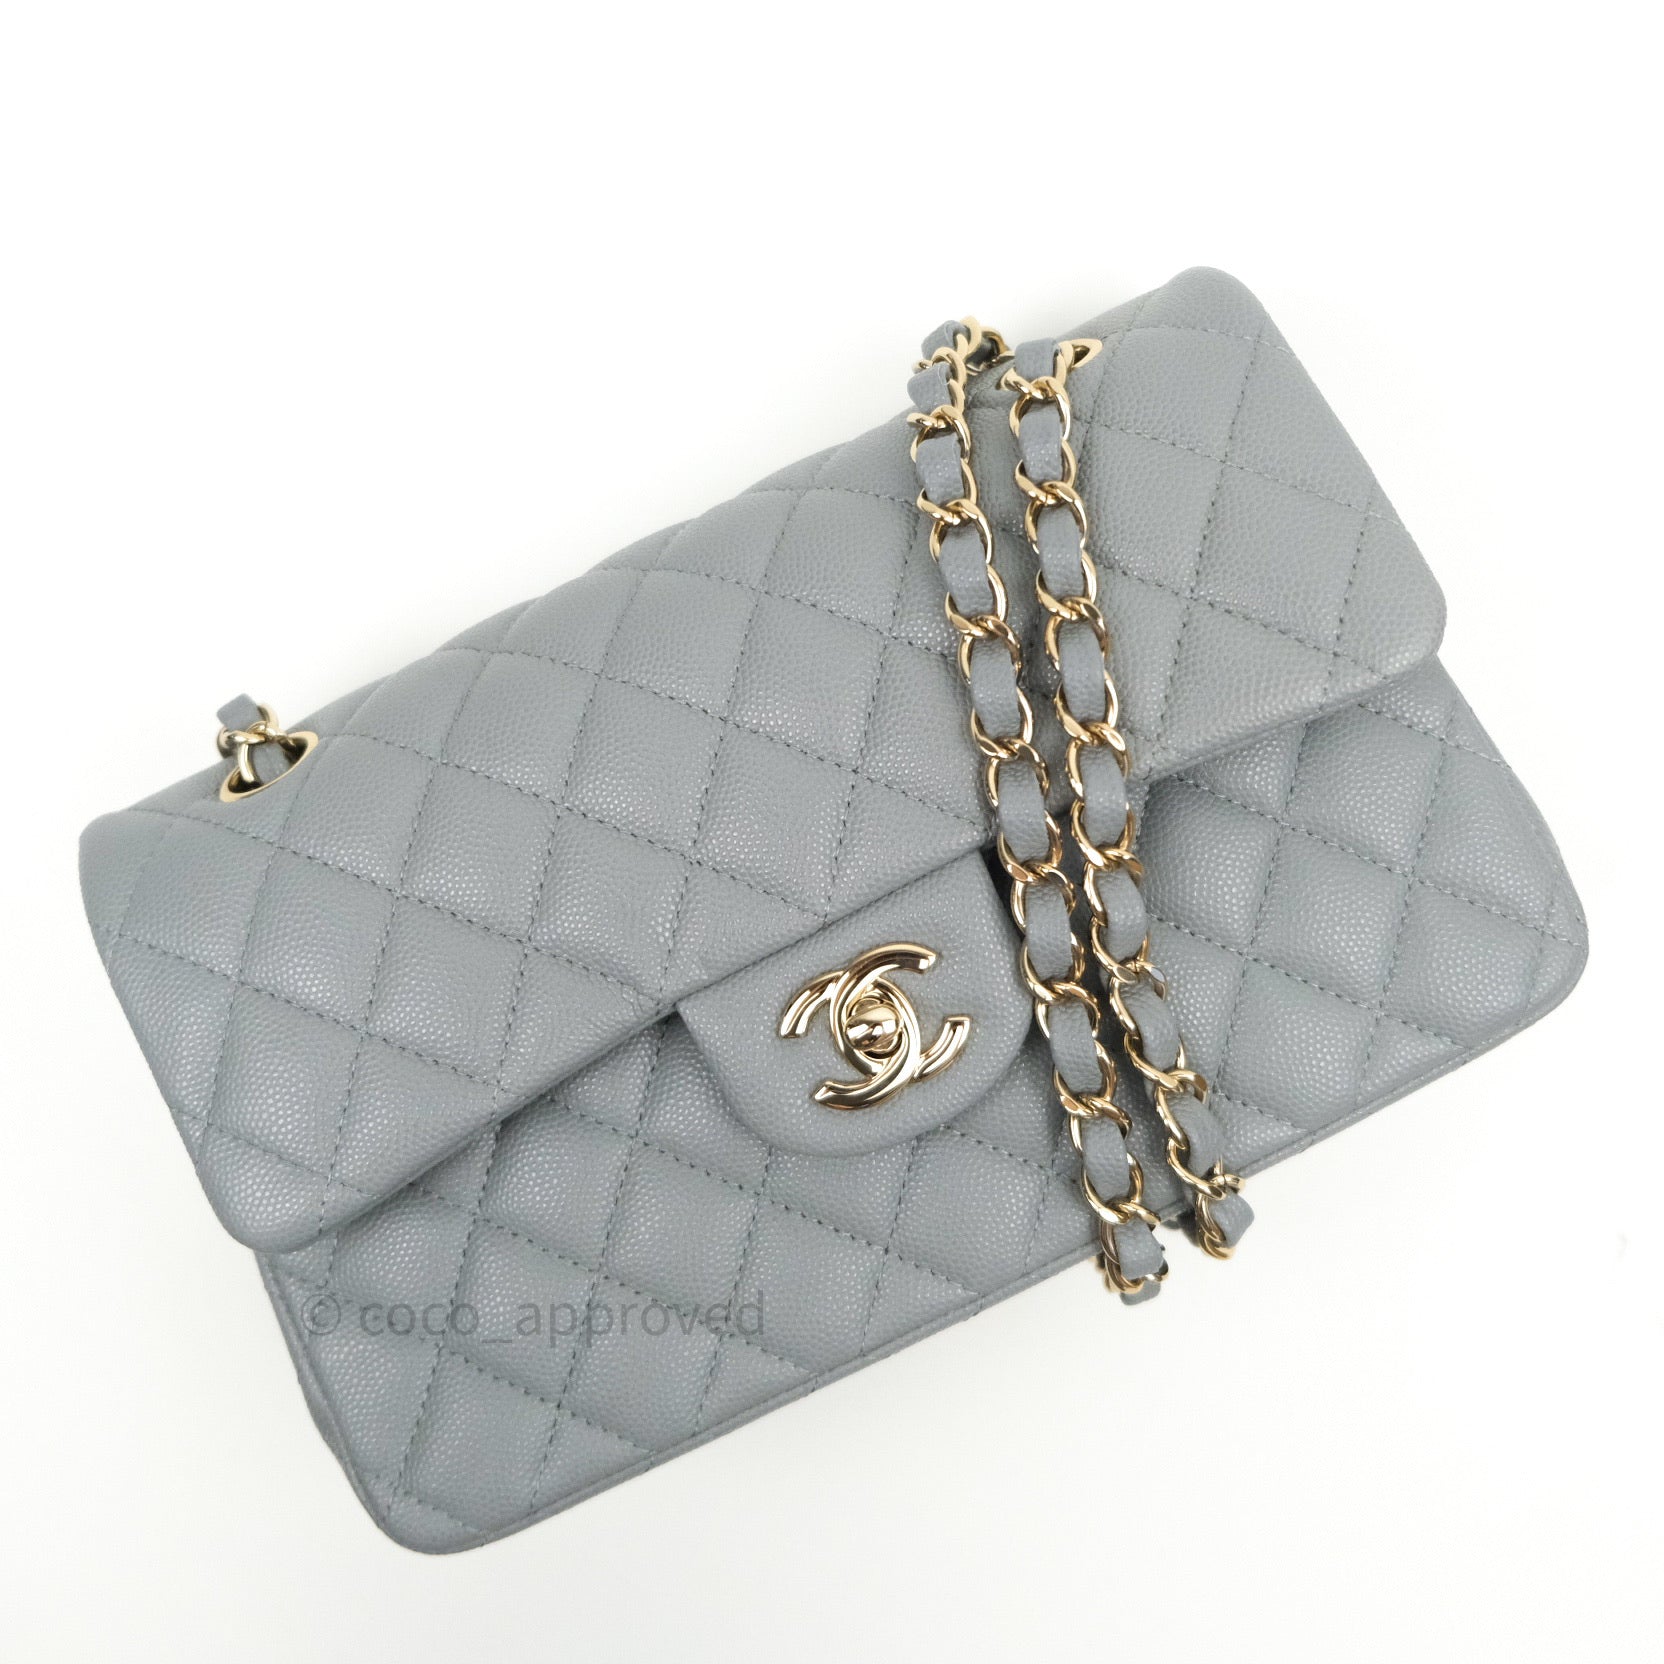 price of chanel small classic flap bag